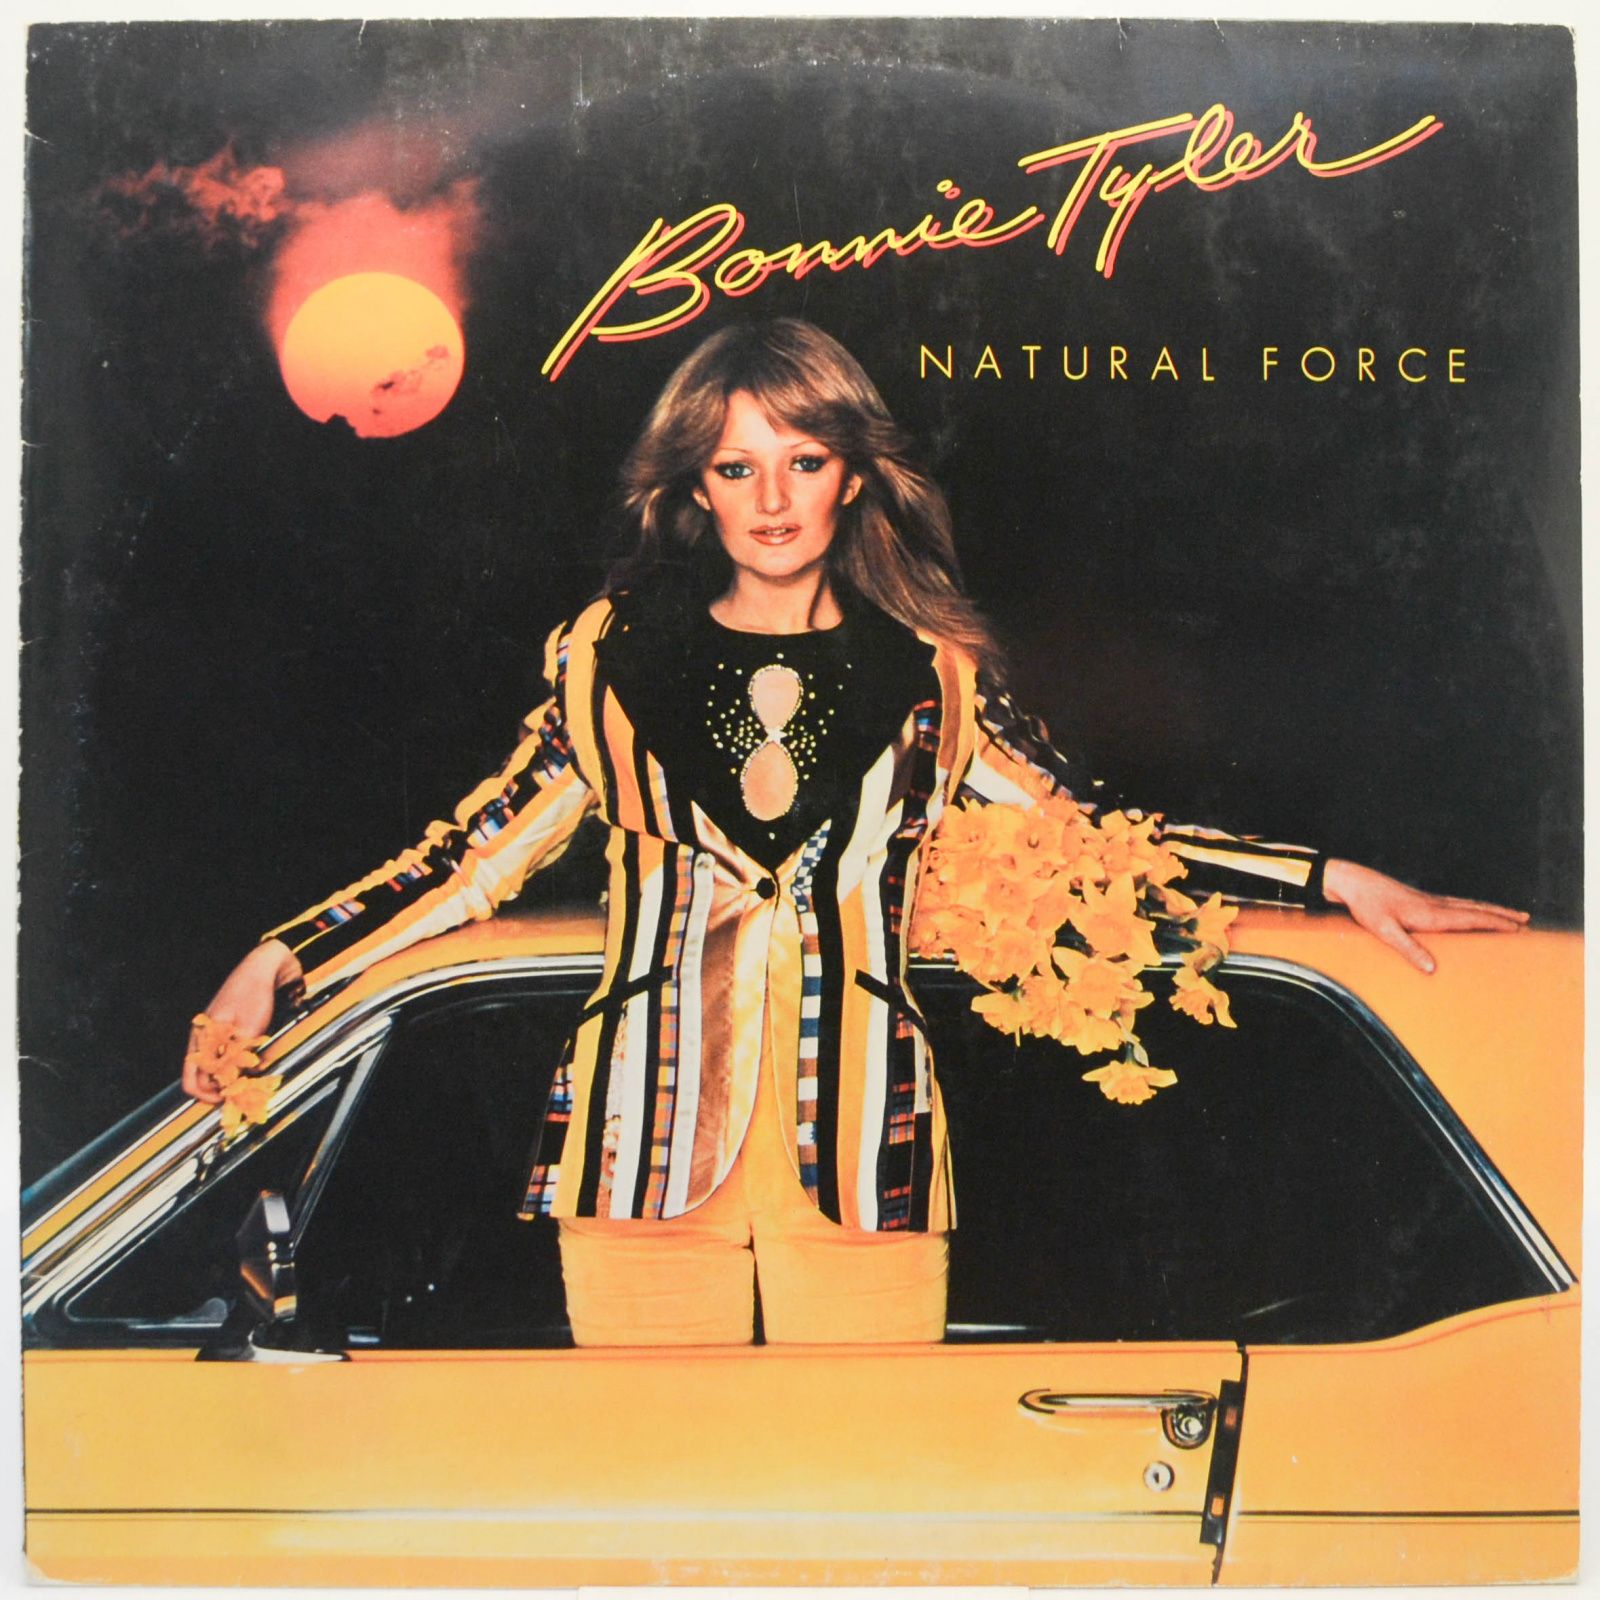 Bonnie Tyler — Natural Force, 1978